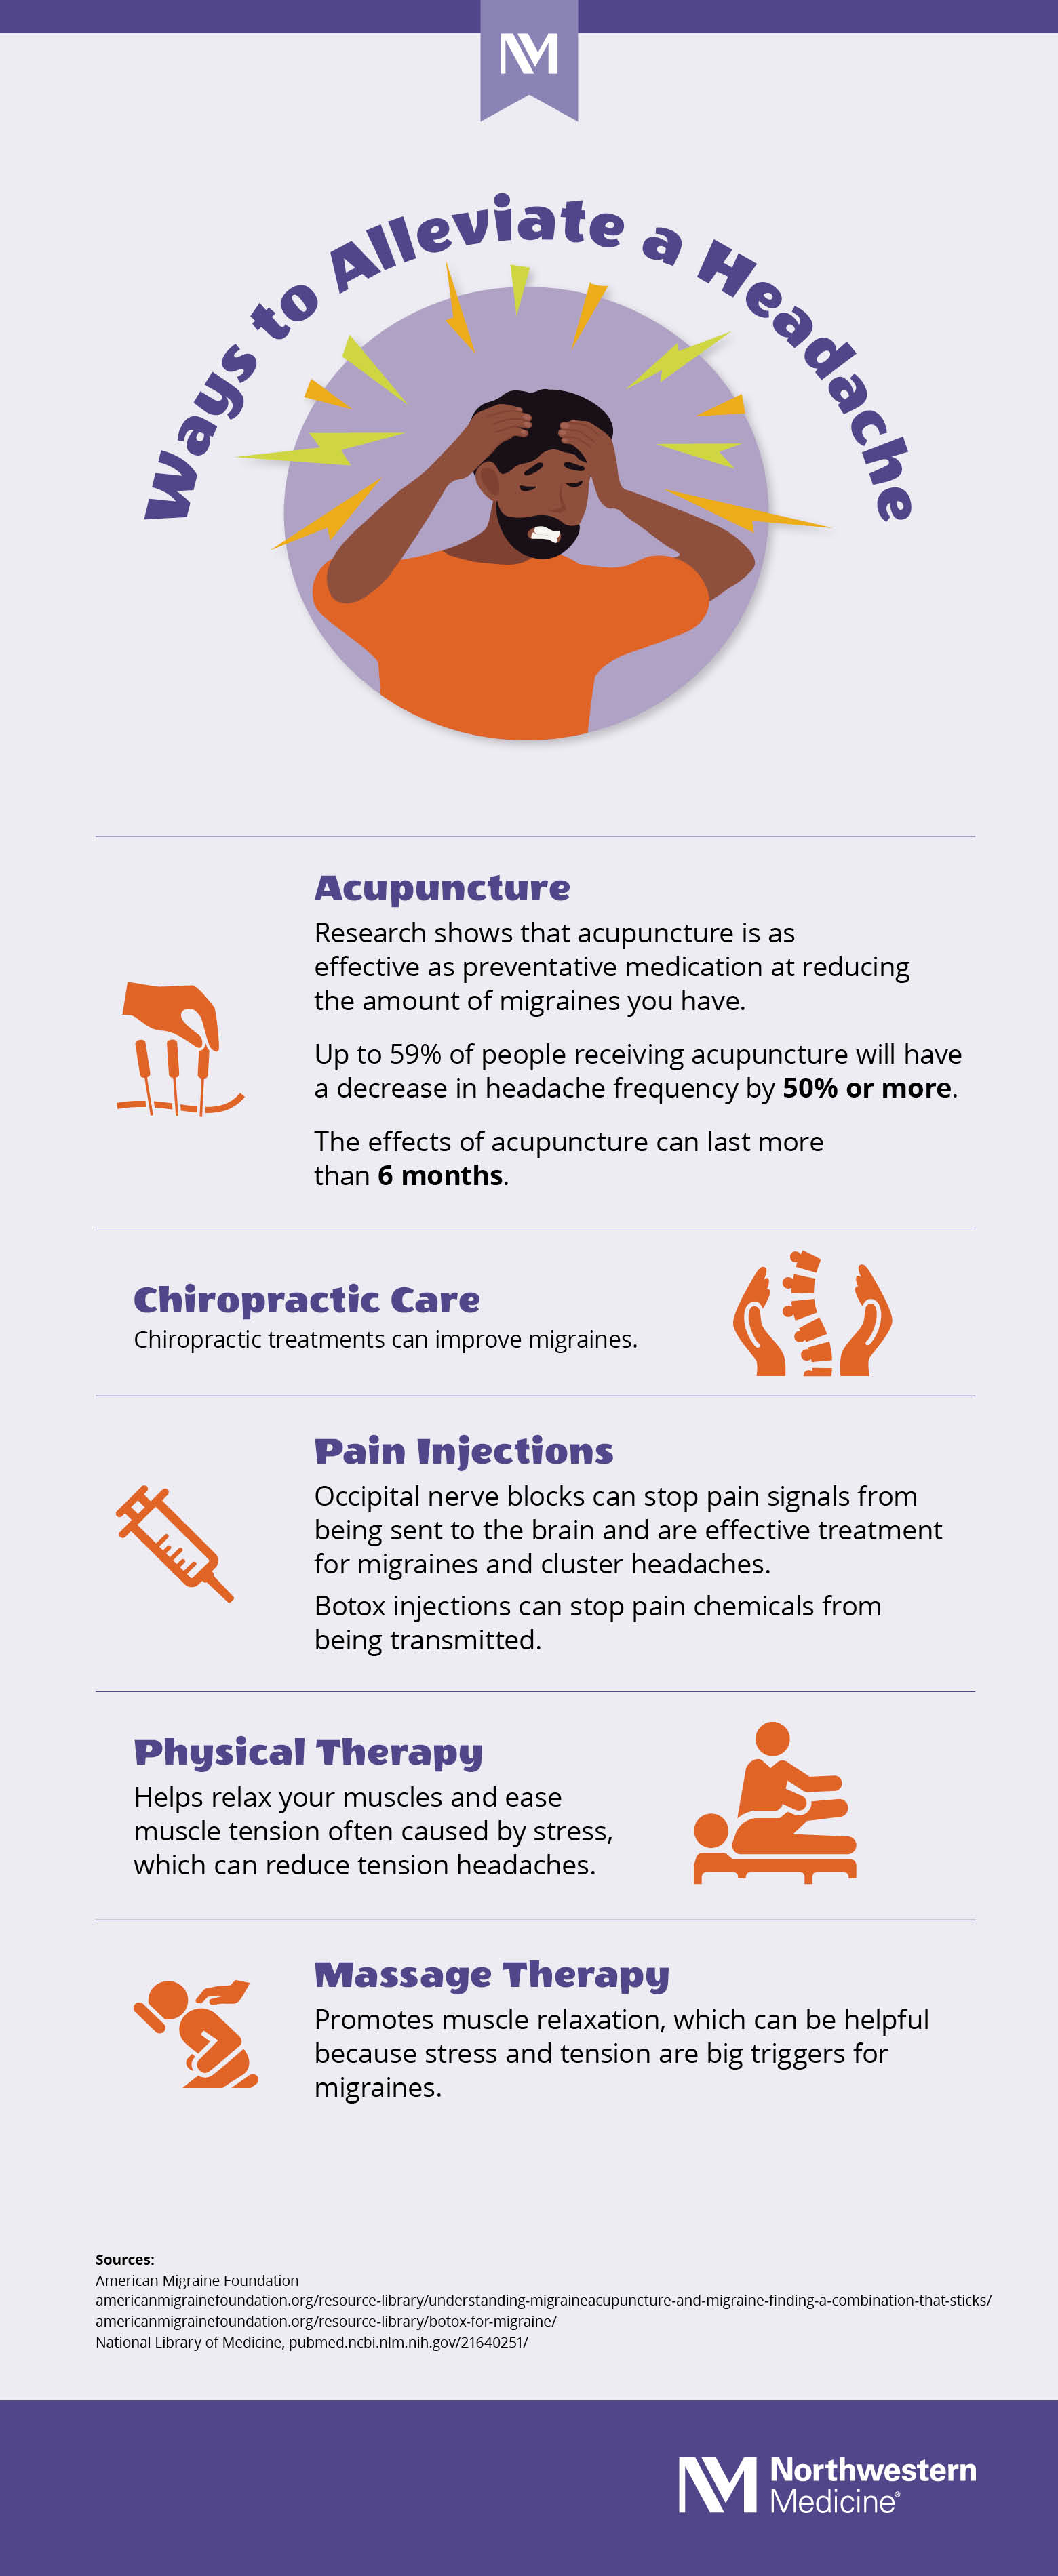 Infographic titled Ways to Alleviate a Headache shows a cartoon image of a man with brown skin and black hair with lightning bolts around his head to indicate pain, and list of treatments: Acupuncture, Chiropractic Care, Pain Injections, Physical Therapy, Massage Therapy